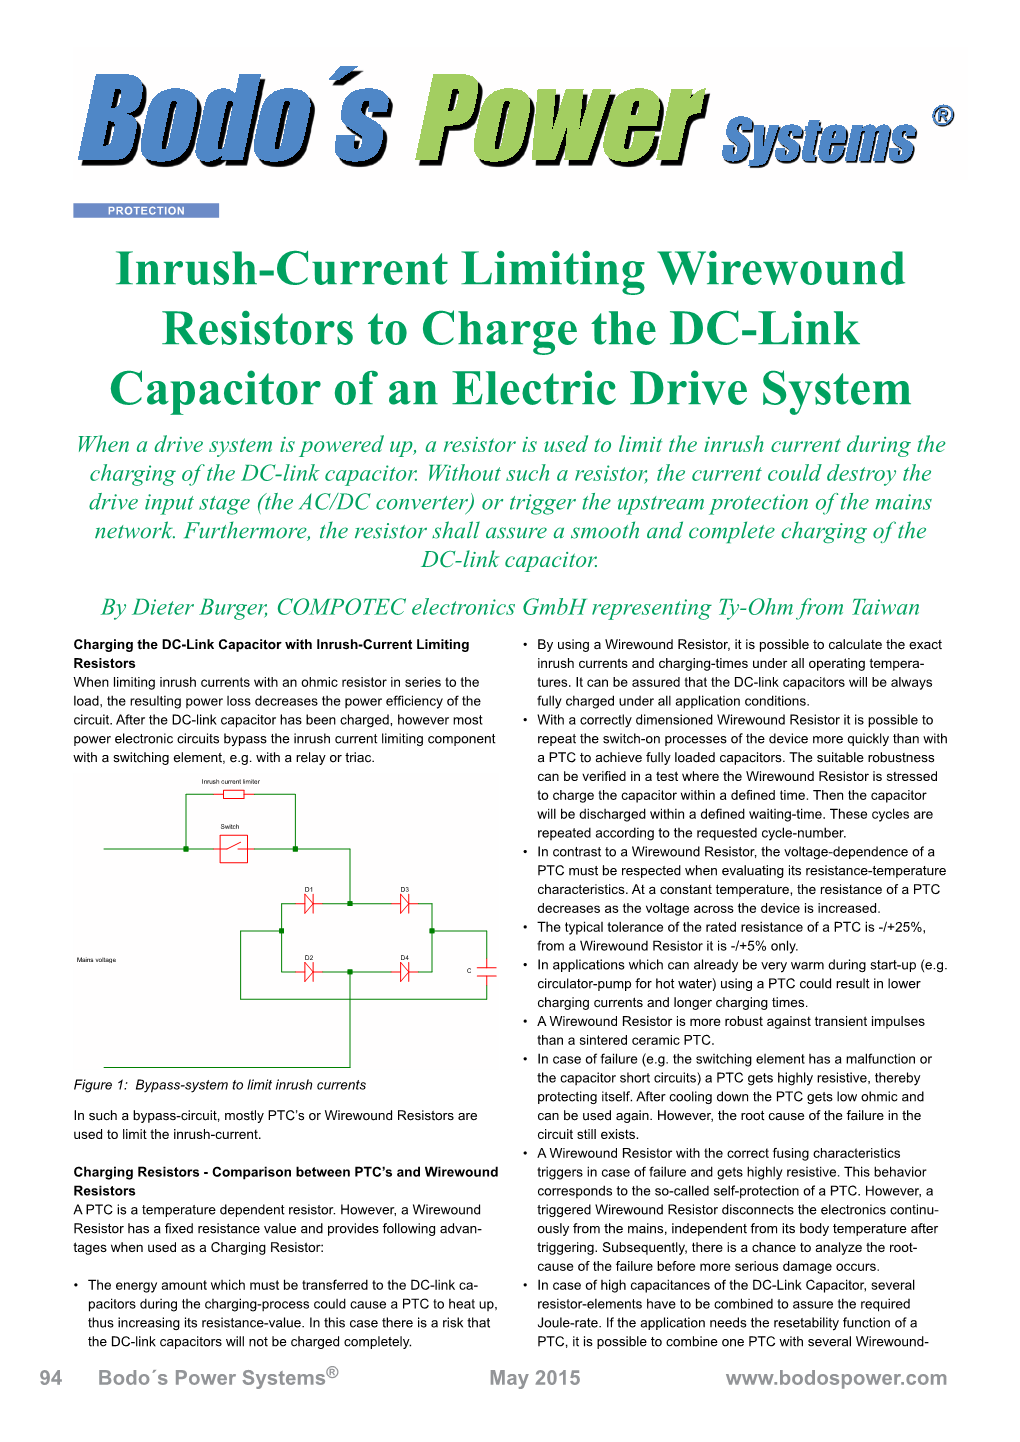 Inrush-Current Limiting Wirewound Resistors to Charge the DC-Link